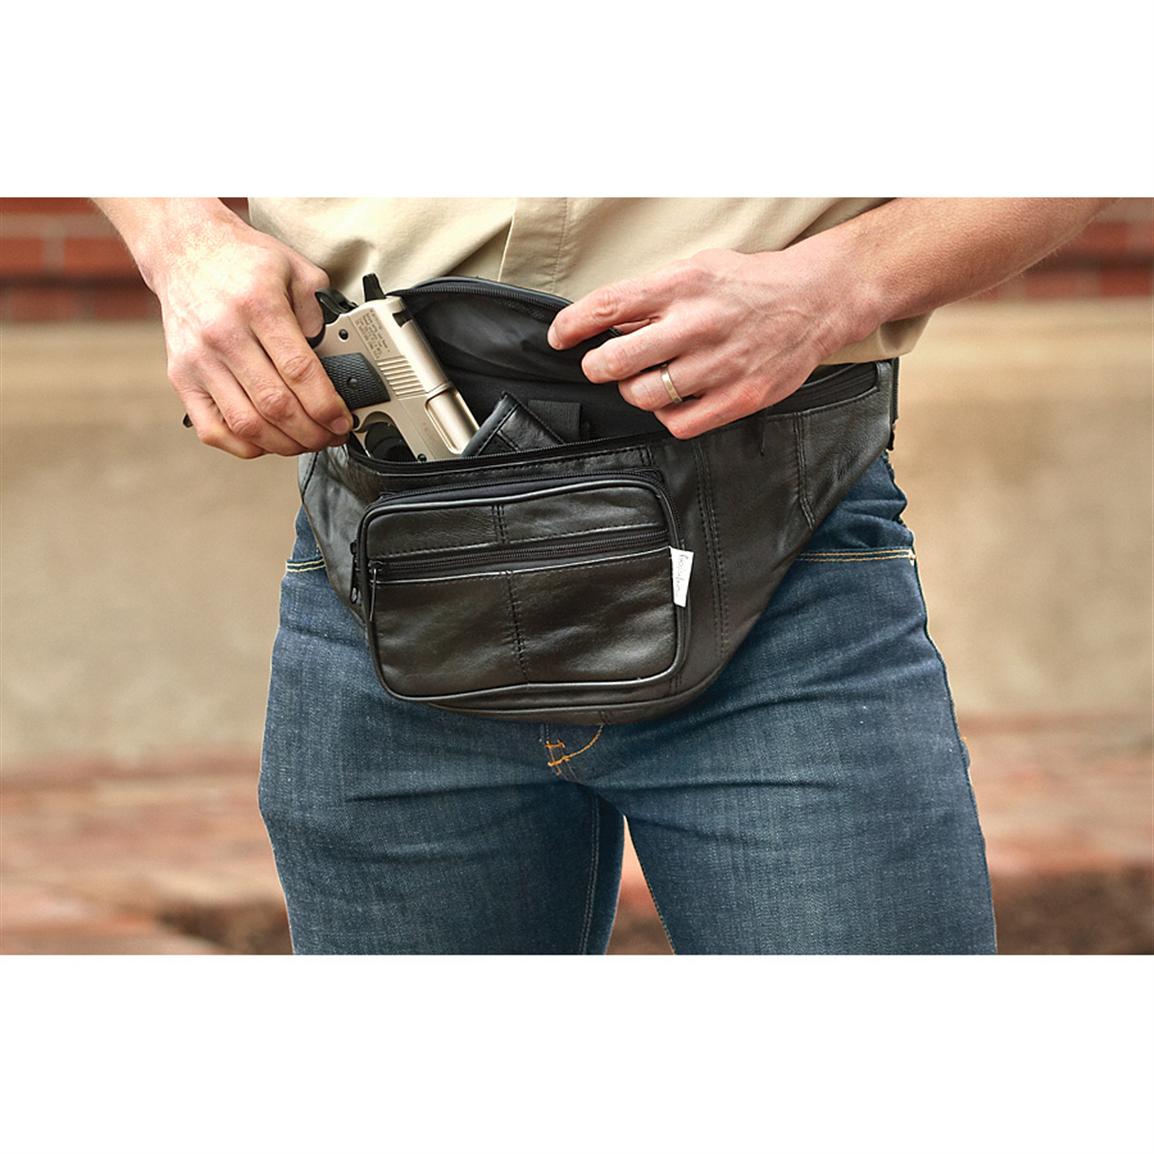 The 3 Best Fanny Pack Holsters For Concealed Carry [reviews] | IUCN Water